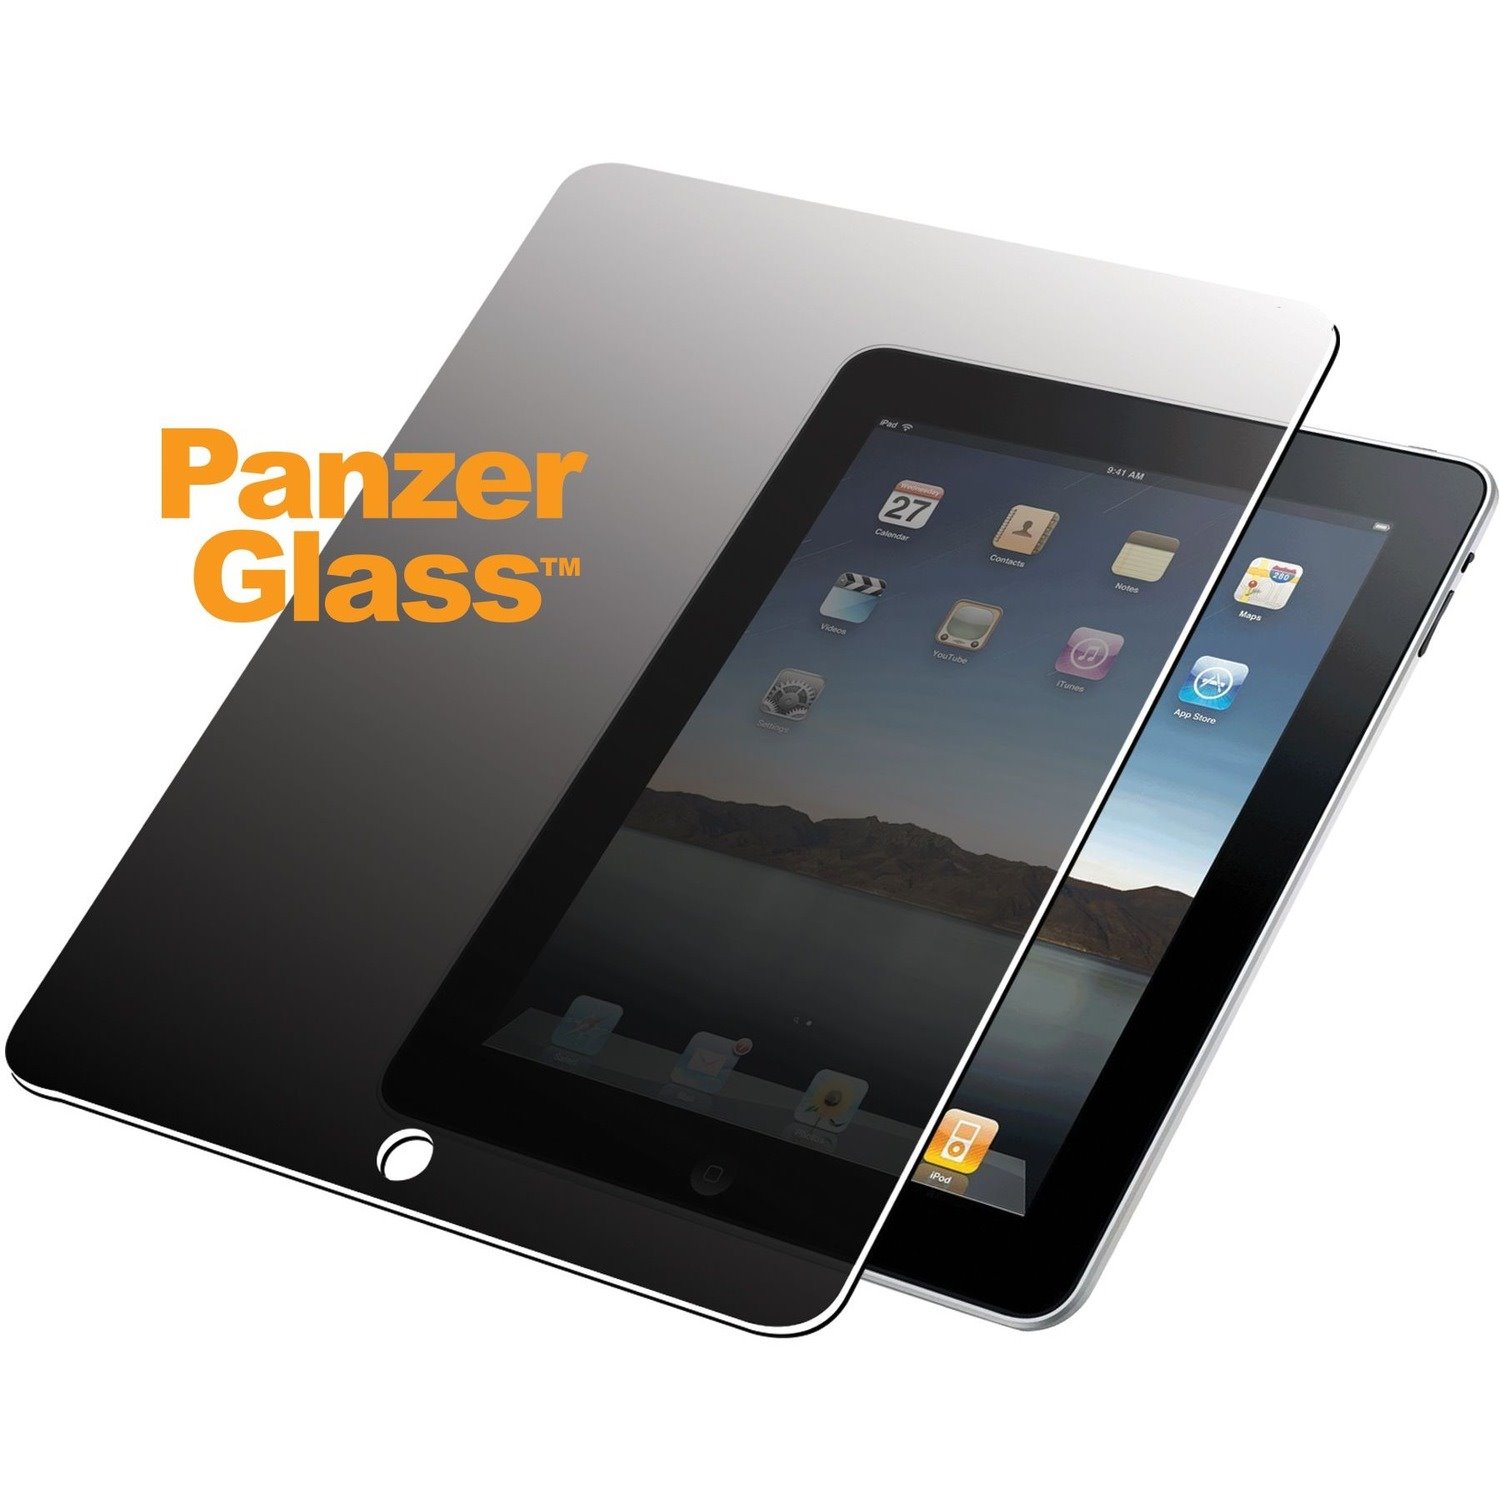 PanzerGlass Tempered Glass Privacy Screen Protector